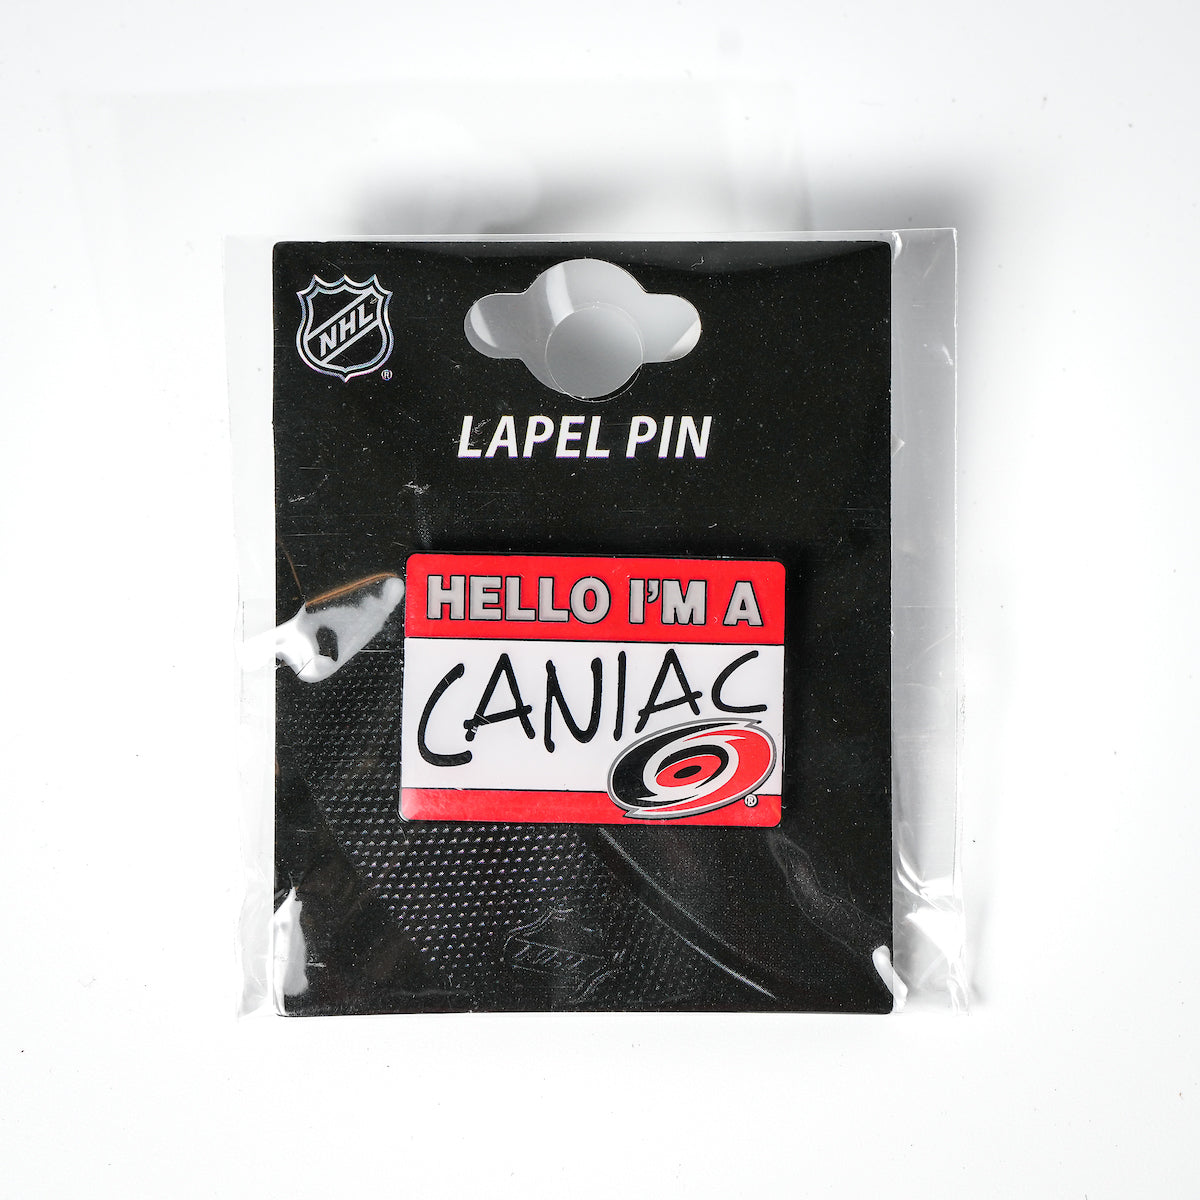 Pin with nametag design that says "Hello I'm A Caniac"